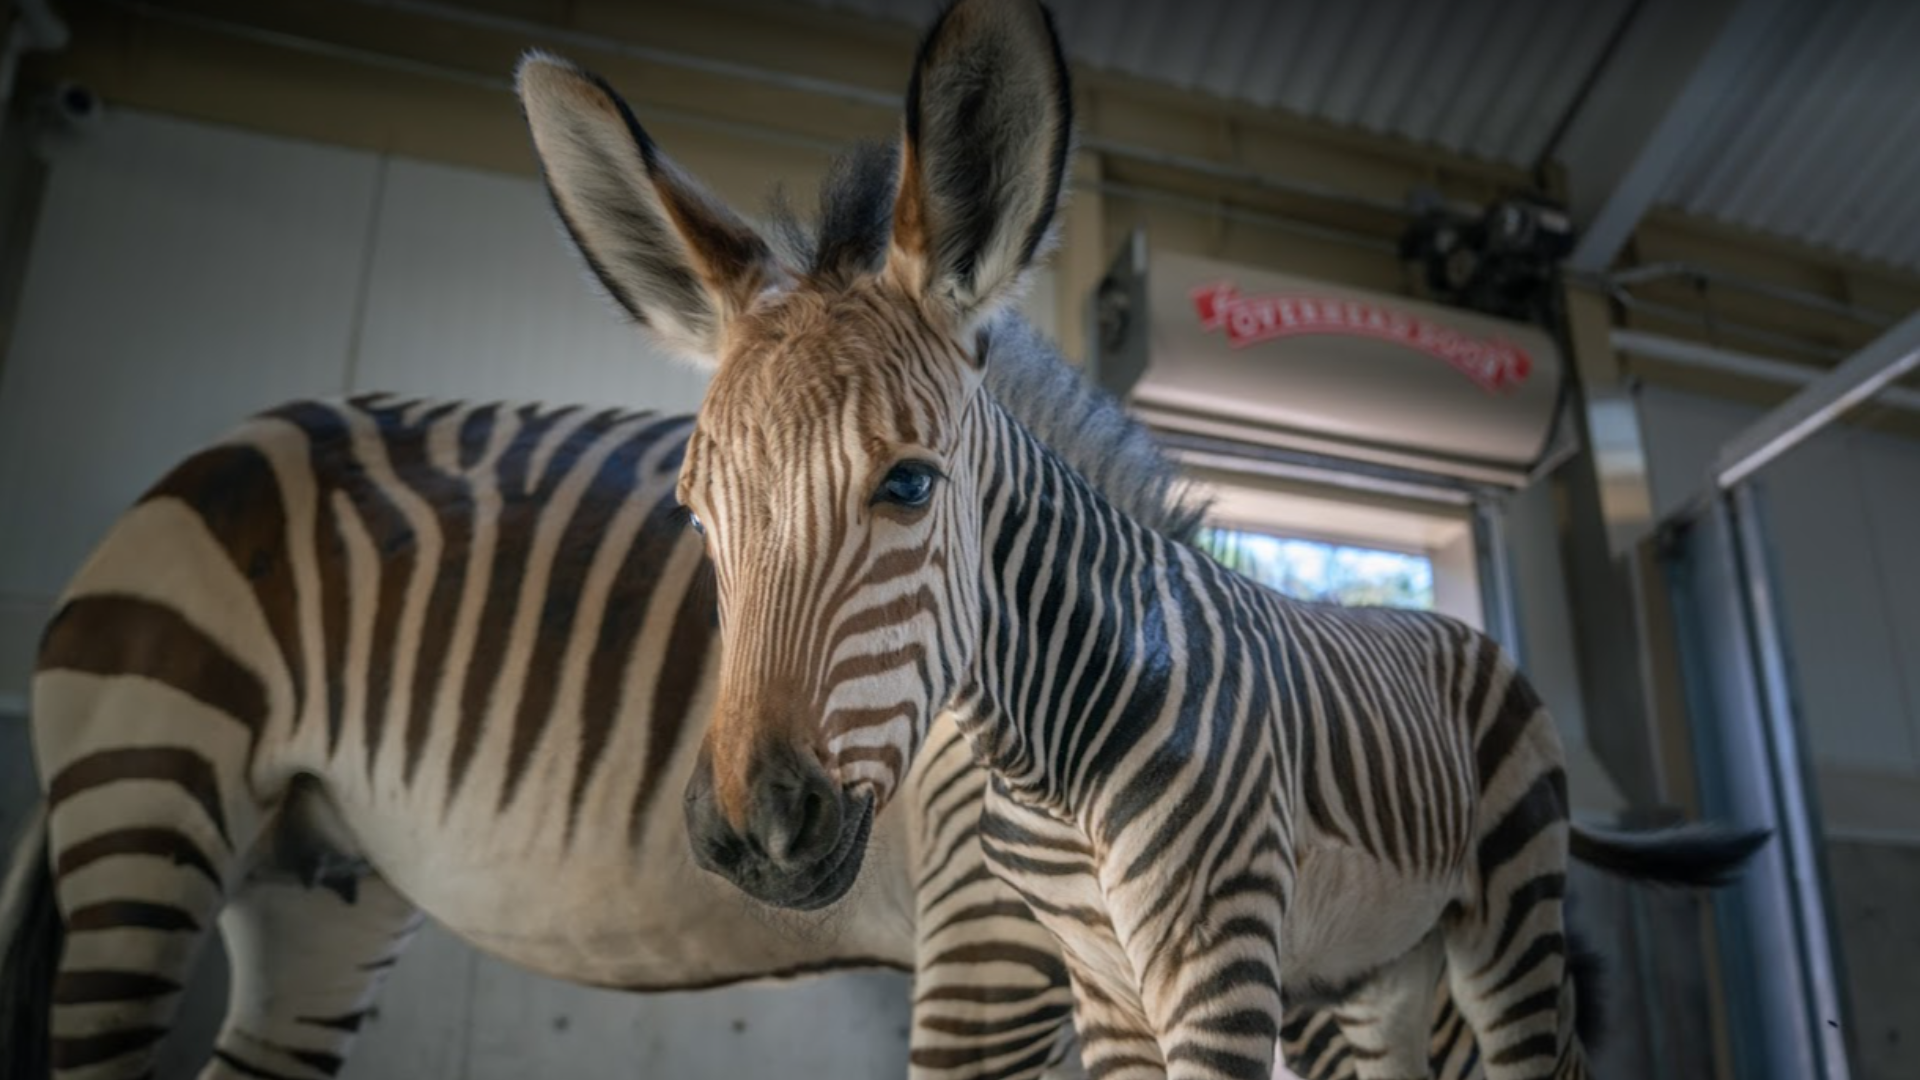 the new hogle zoo zebra baby is pictured in front of his mom....